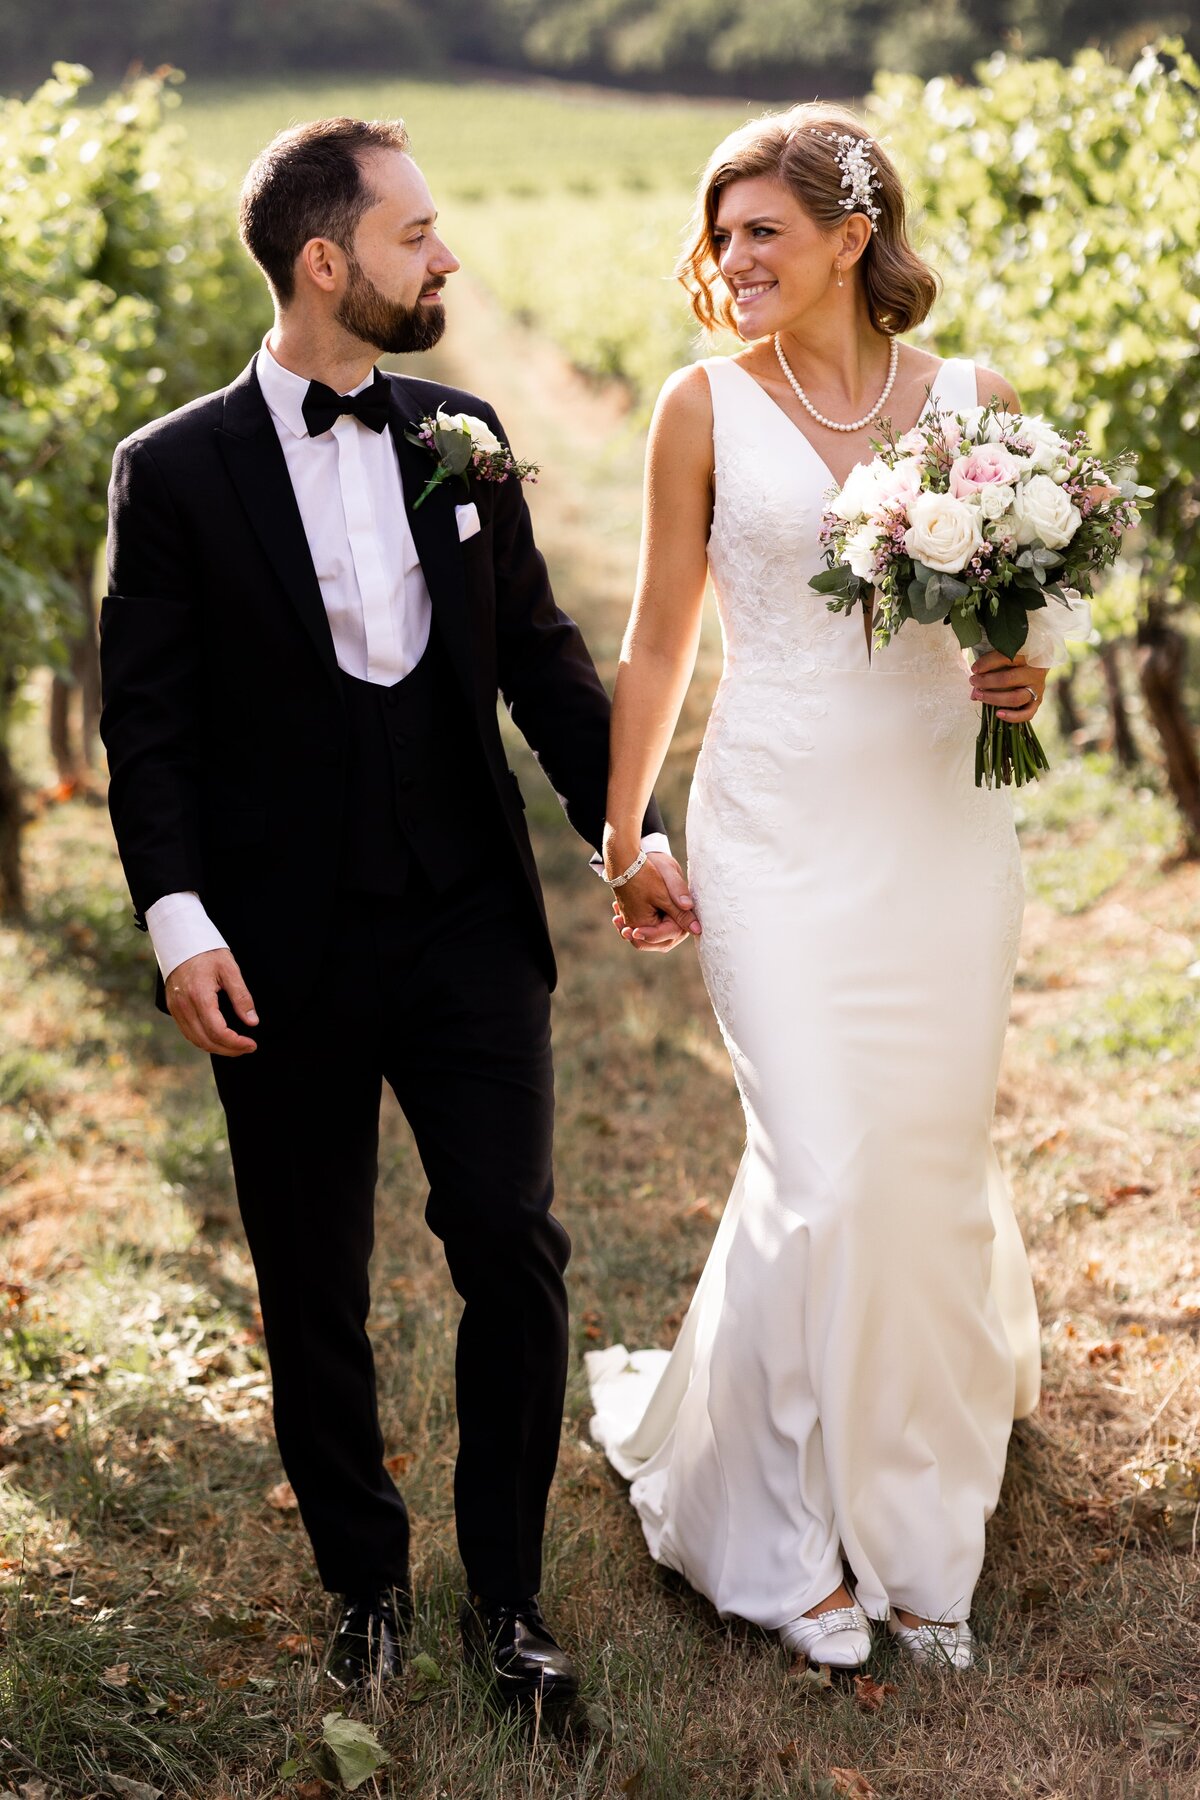 Wedding photography of bride and groom walking holding hands in vineyards at Denbies in Surrey